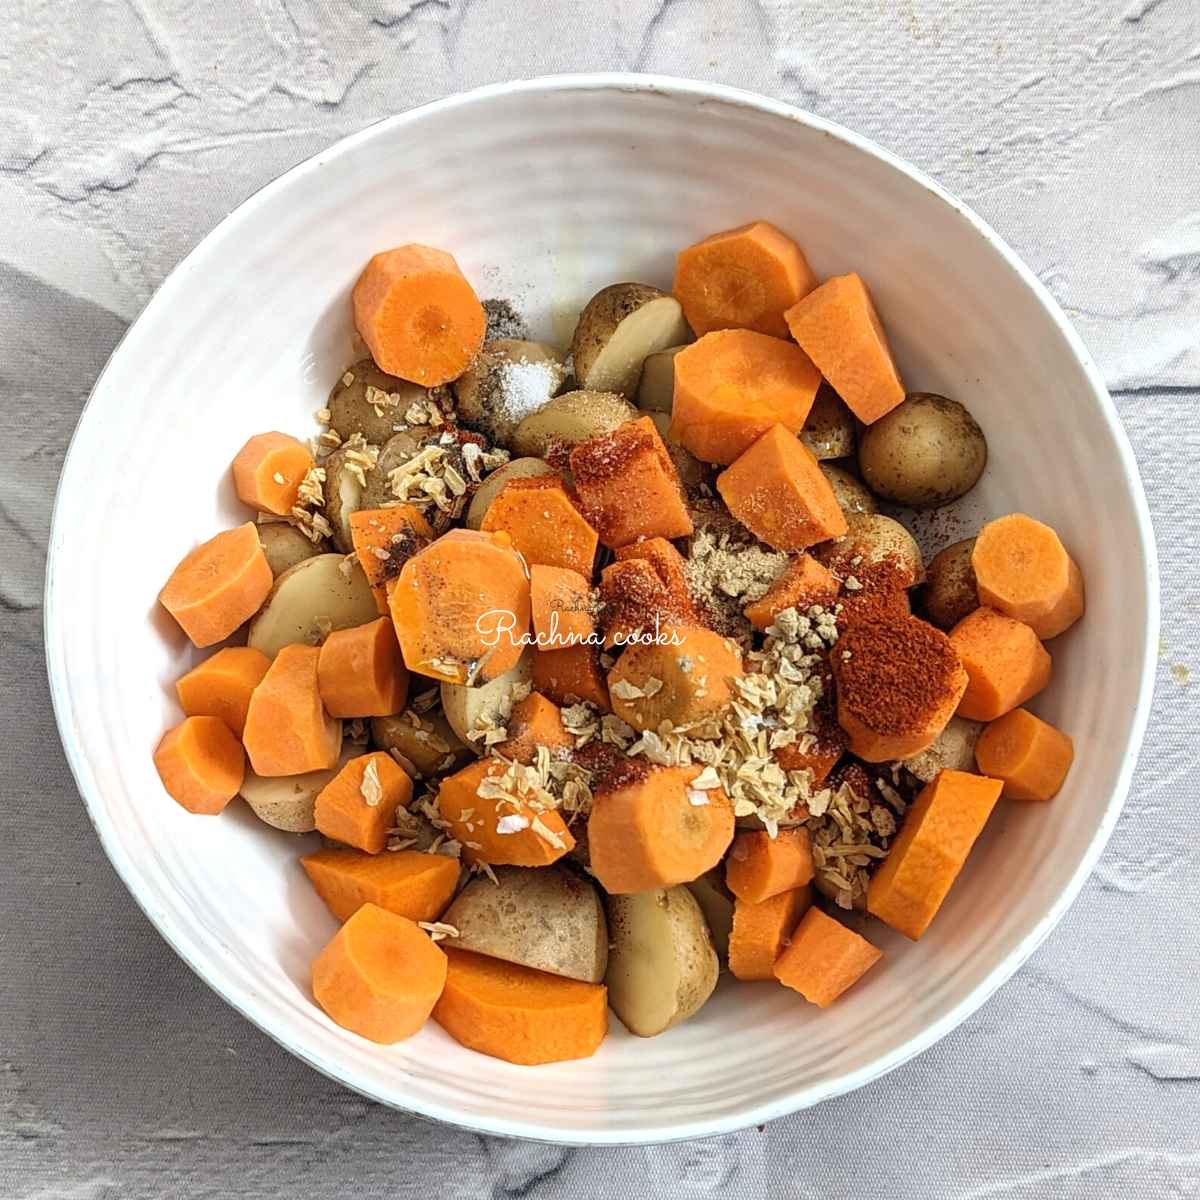 Chopped carrots and potatoes with seasonings and oil in a bowl